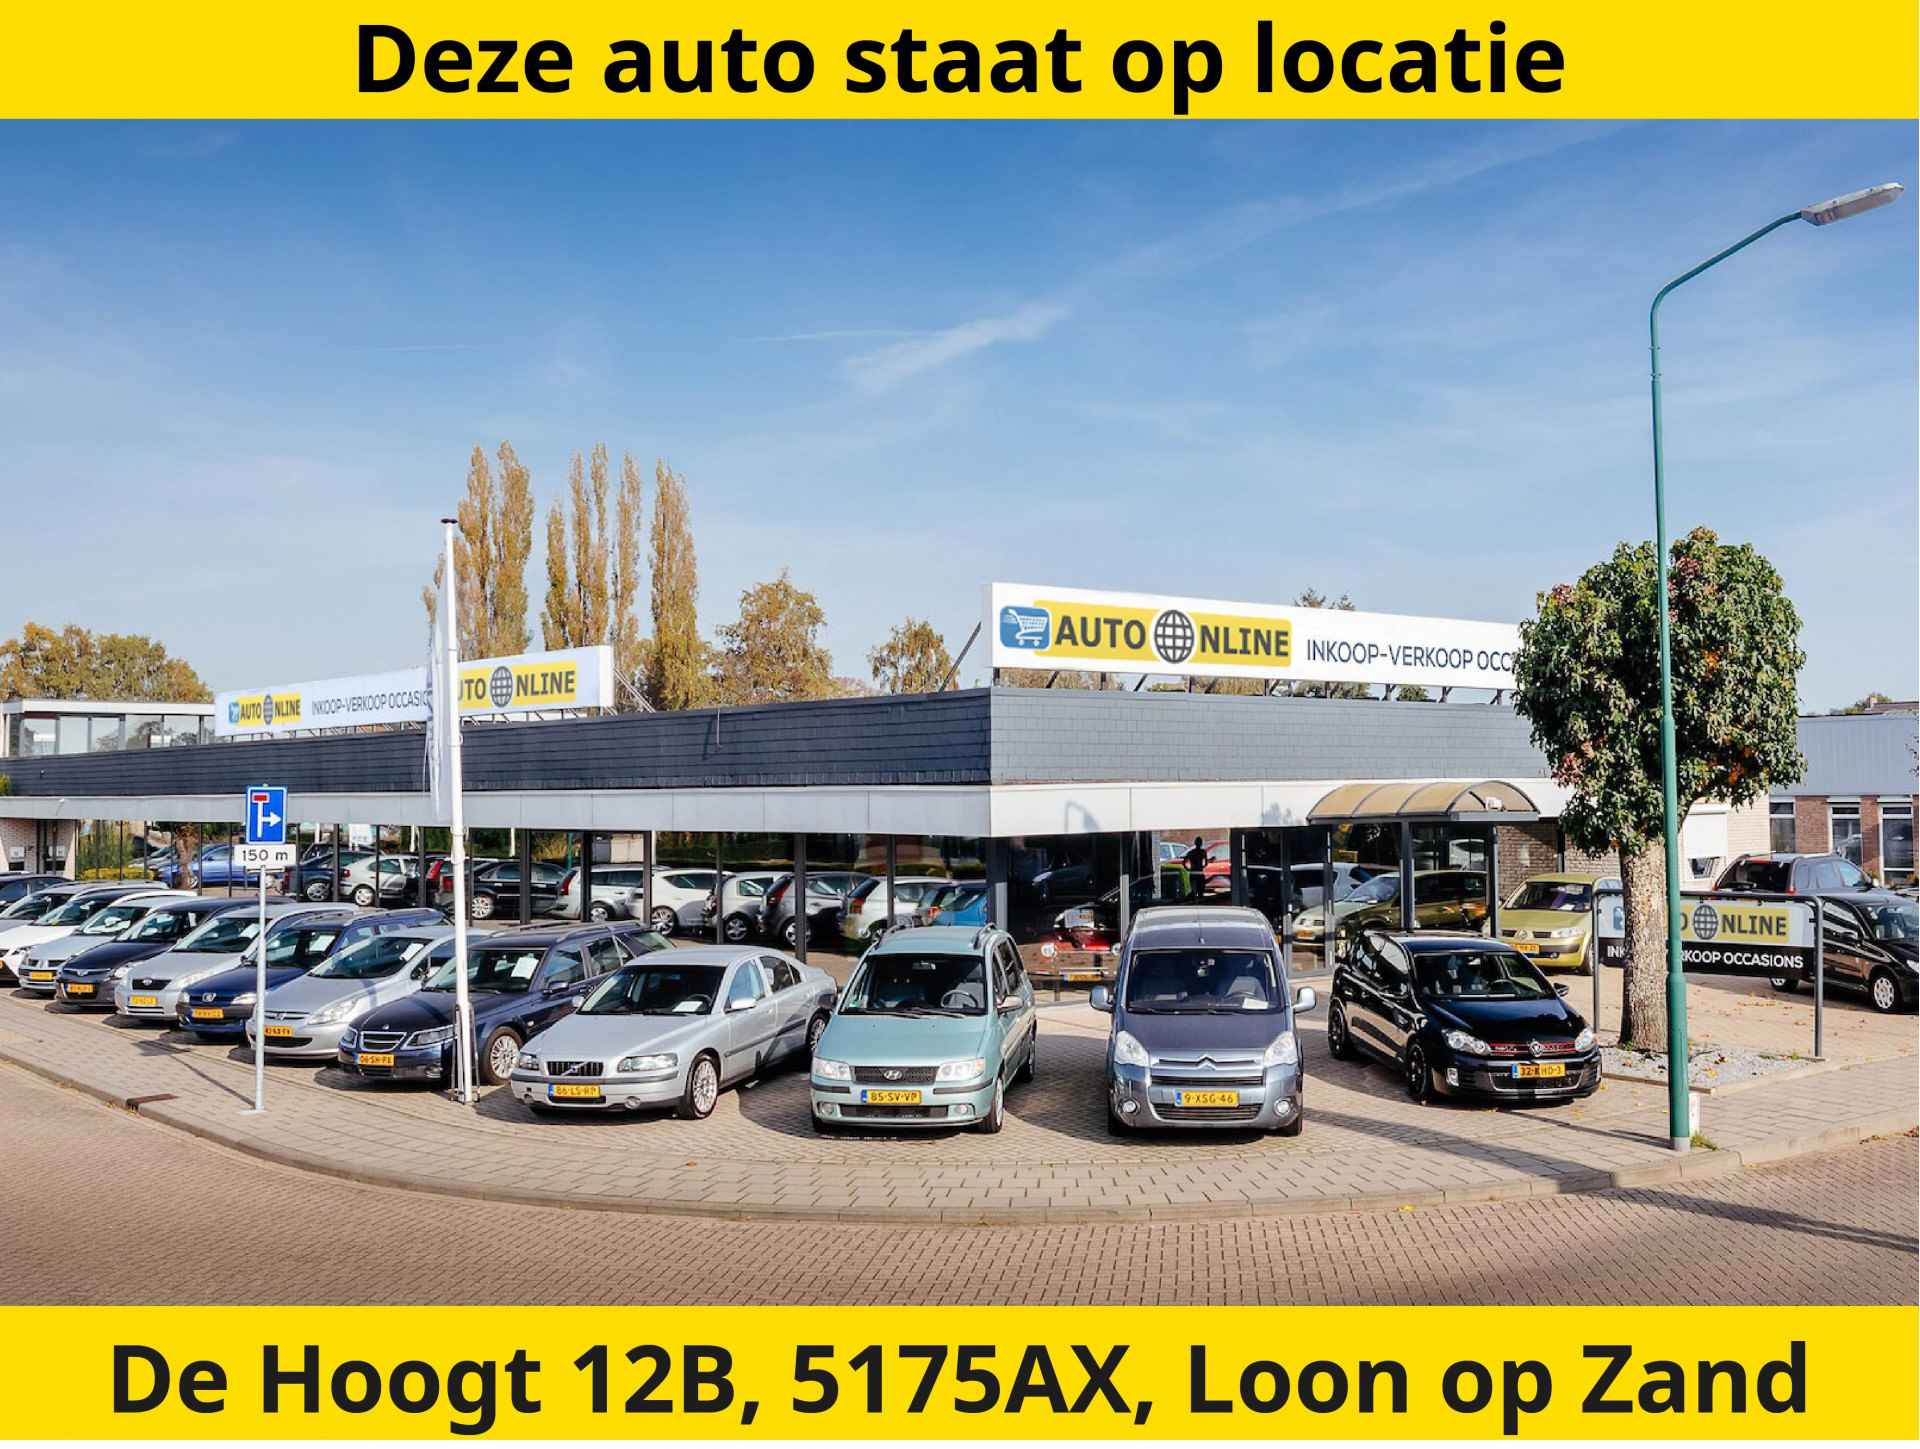 Land Rover Range Rover 4.2 V8 Supercharged ✅UNIEKE STAAT✅Airco✅Cruise controle✅Navigatie✅5 deurs✅TREKHAAK - 52/52